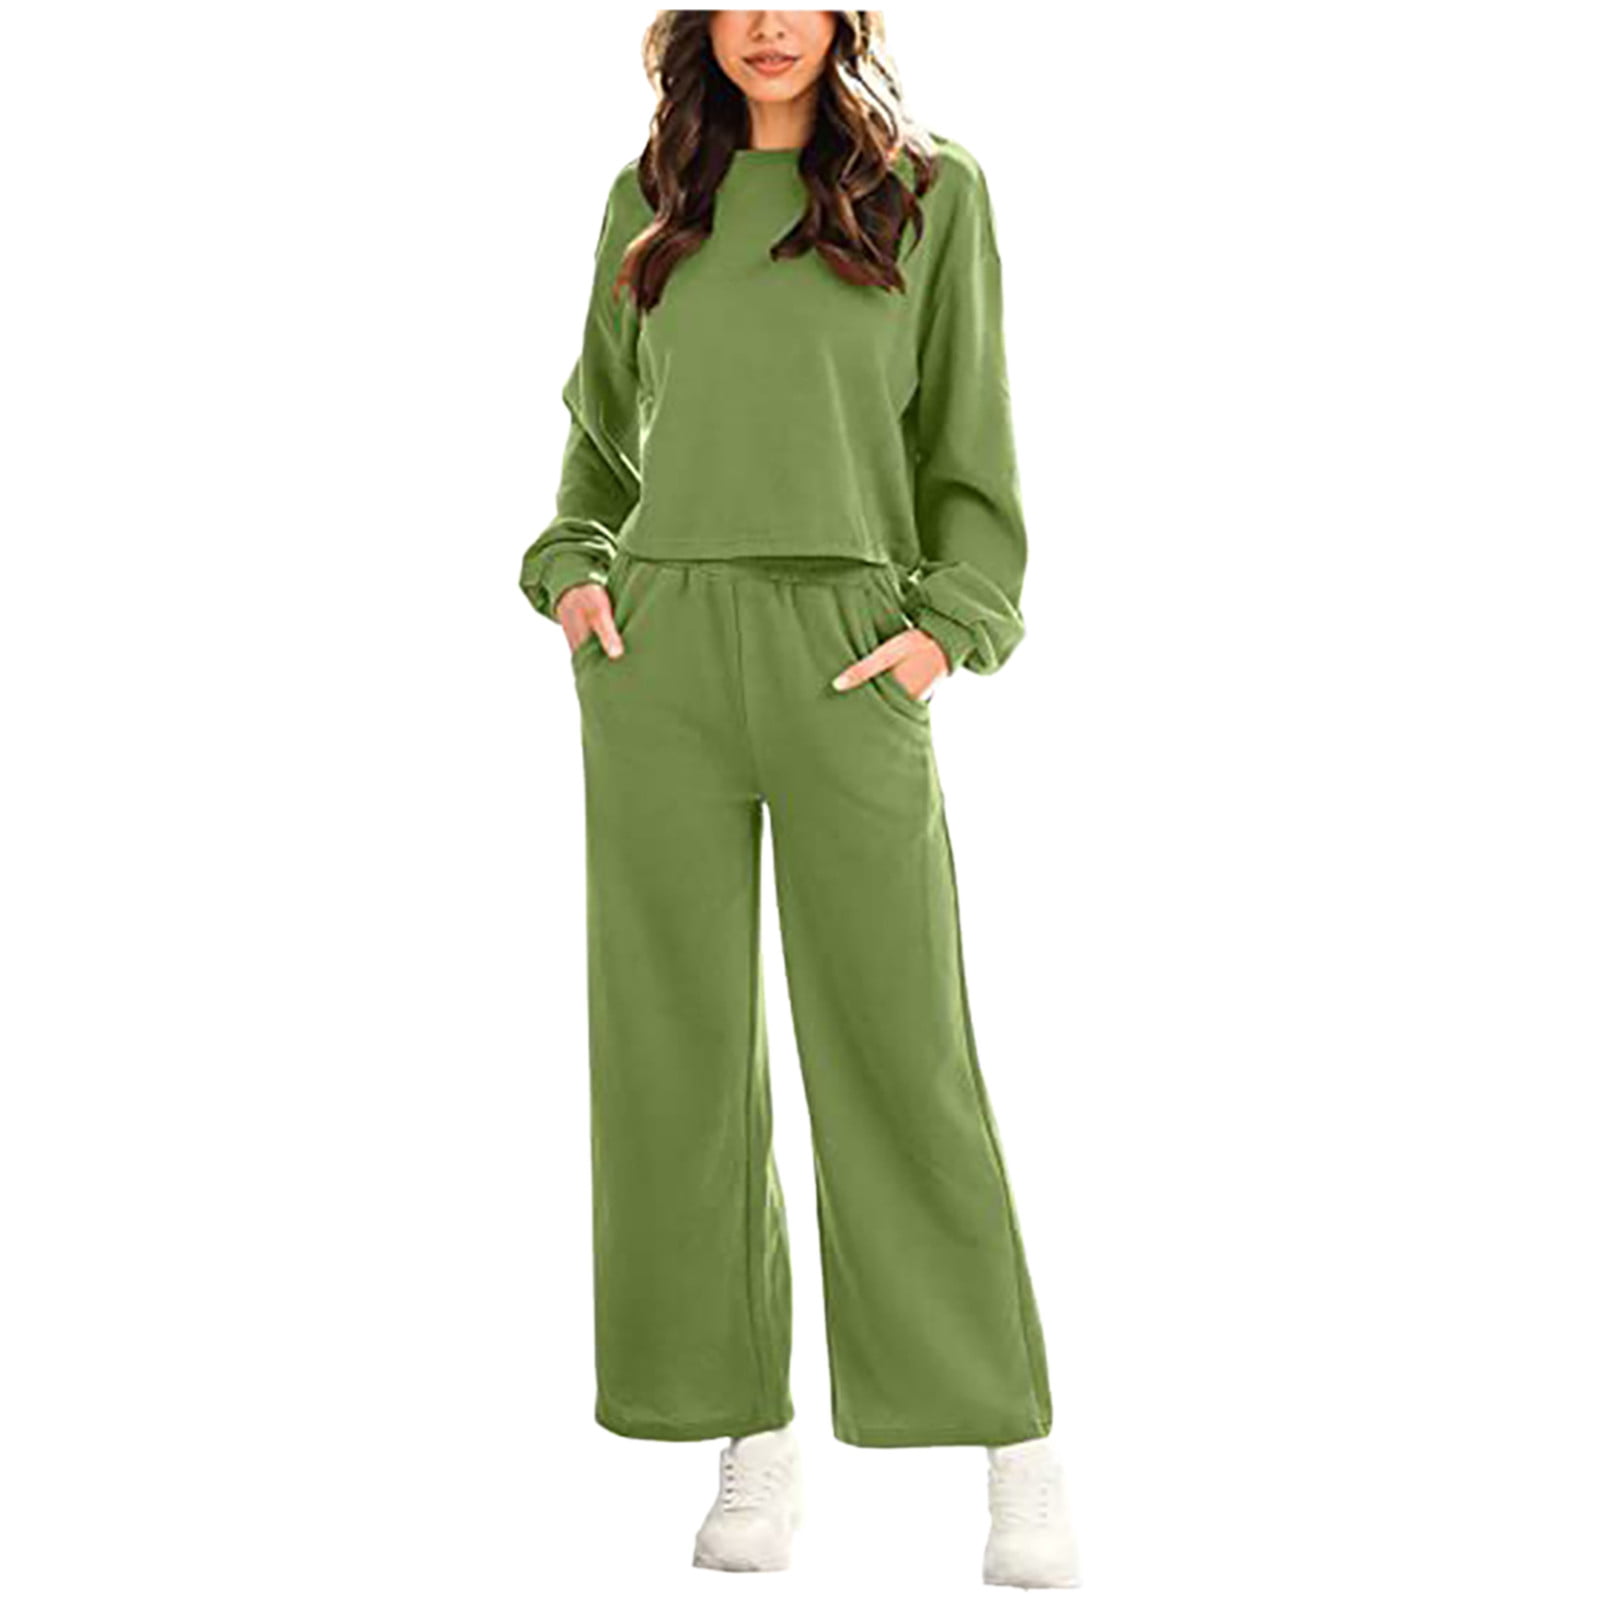 Buy Keepfit Cotton Fleece All over Printed Co-ords lounge wear Set for women, two piece outfit cropped Pullover & Jogger with 2 pocket